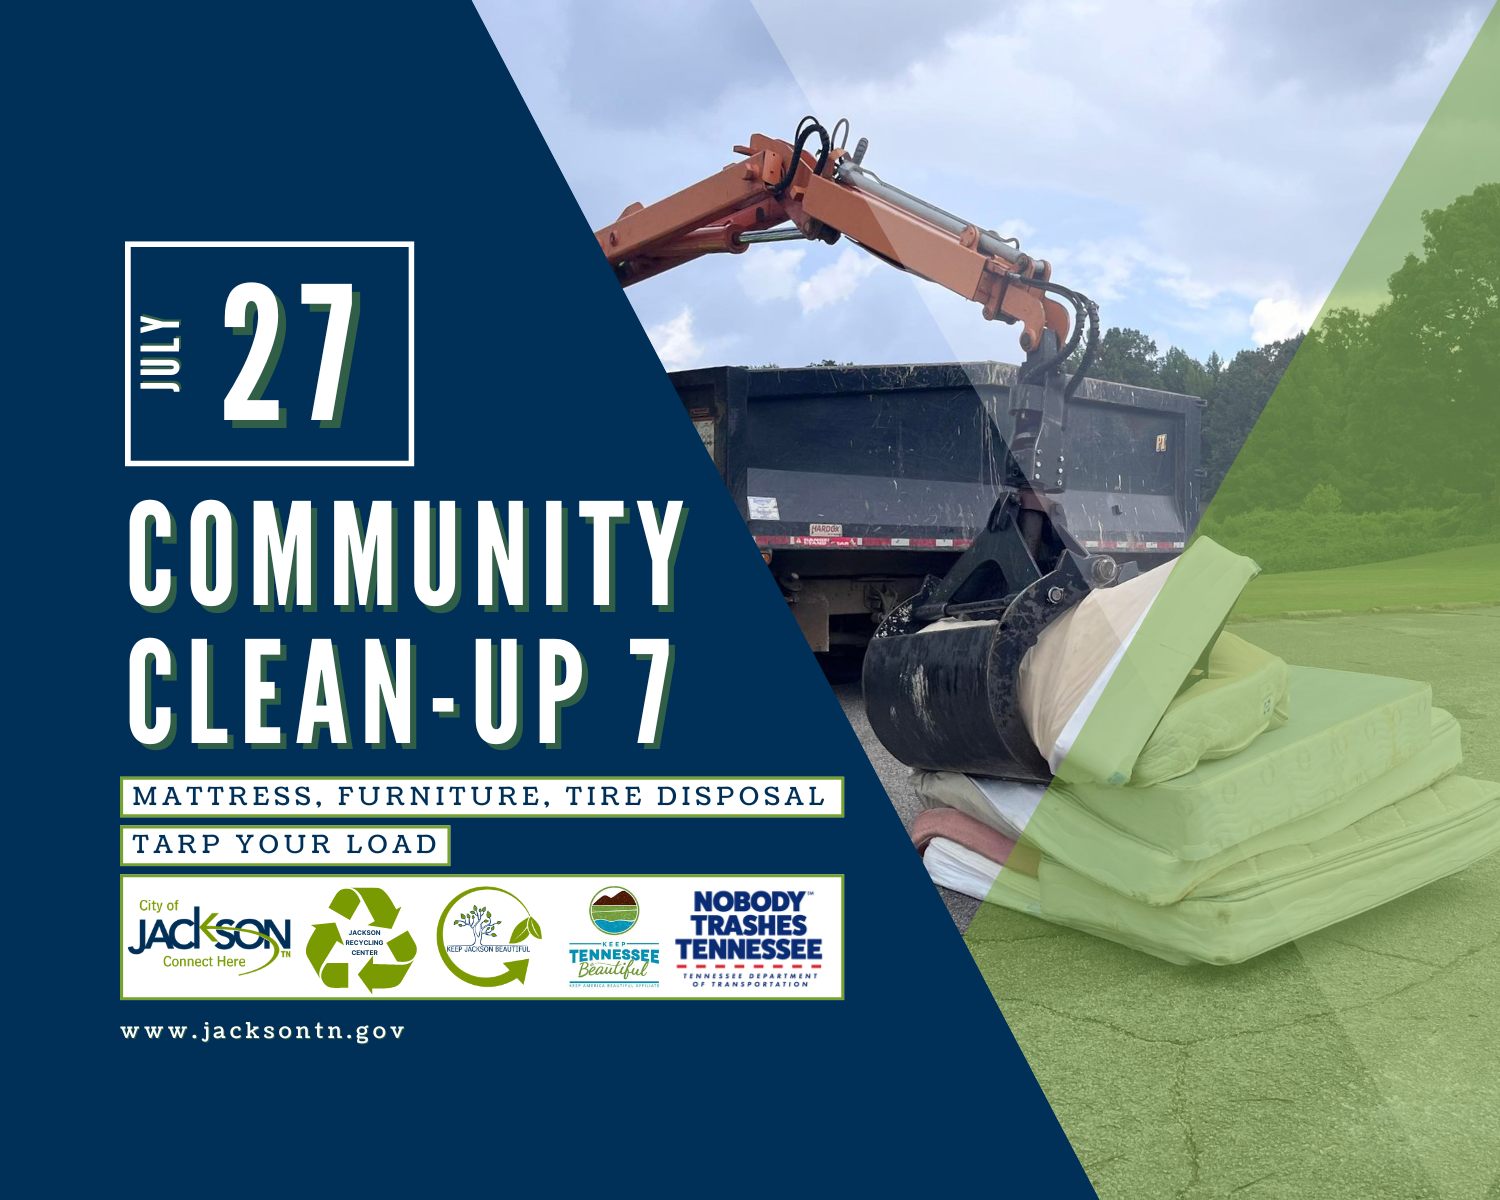 7th Annual Community Clean-Up Day